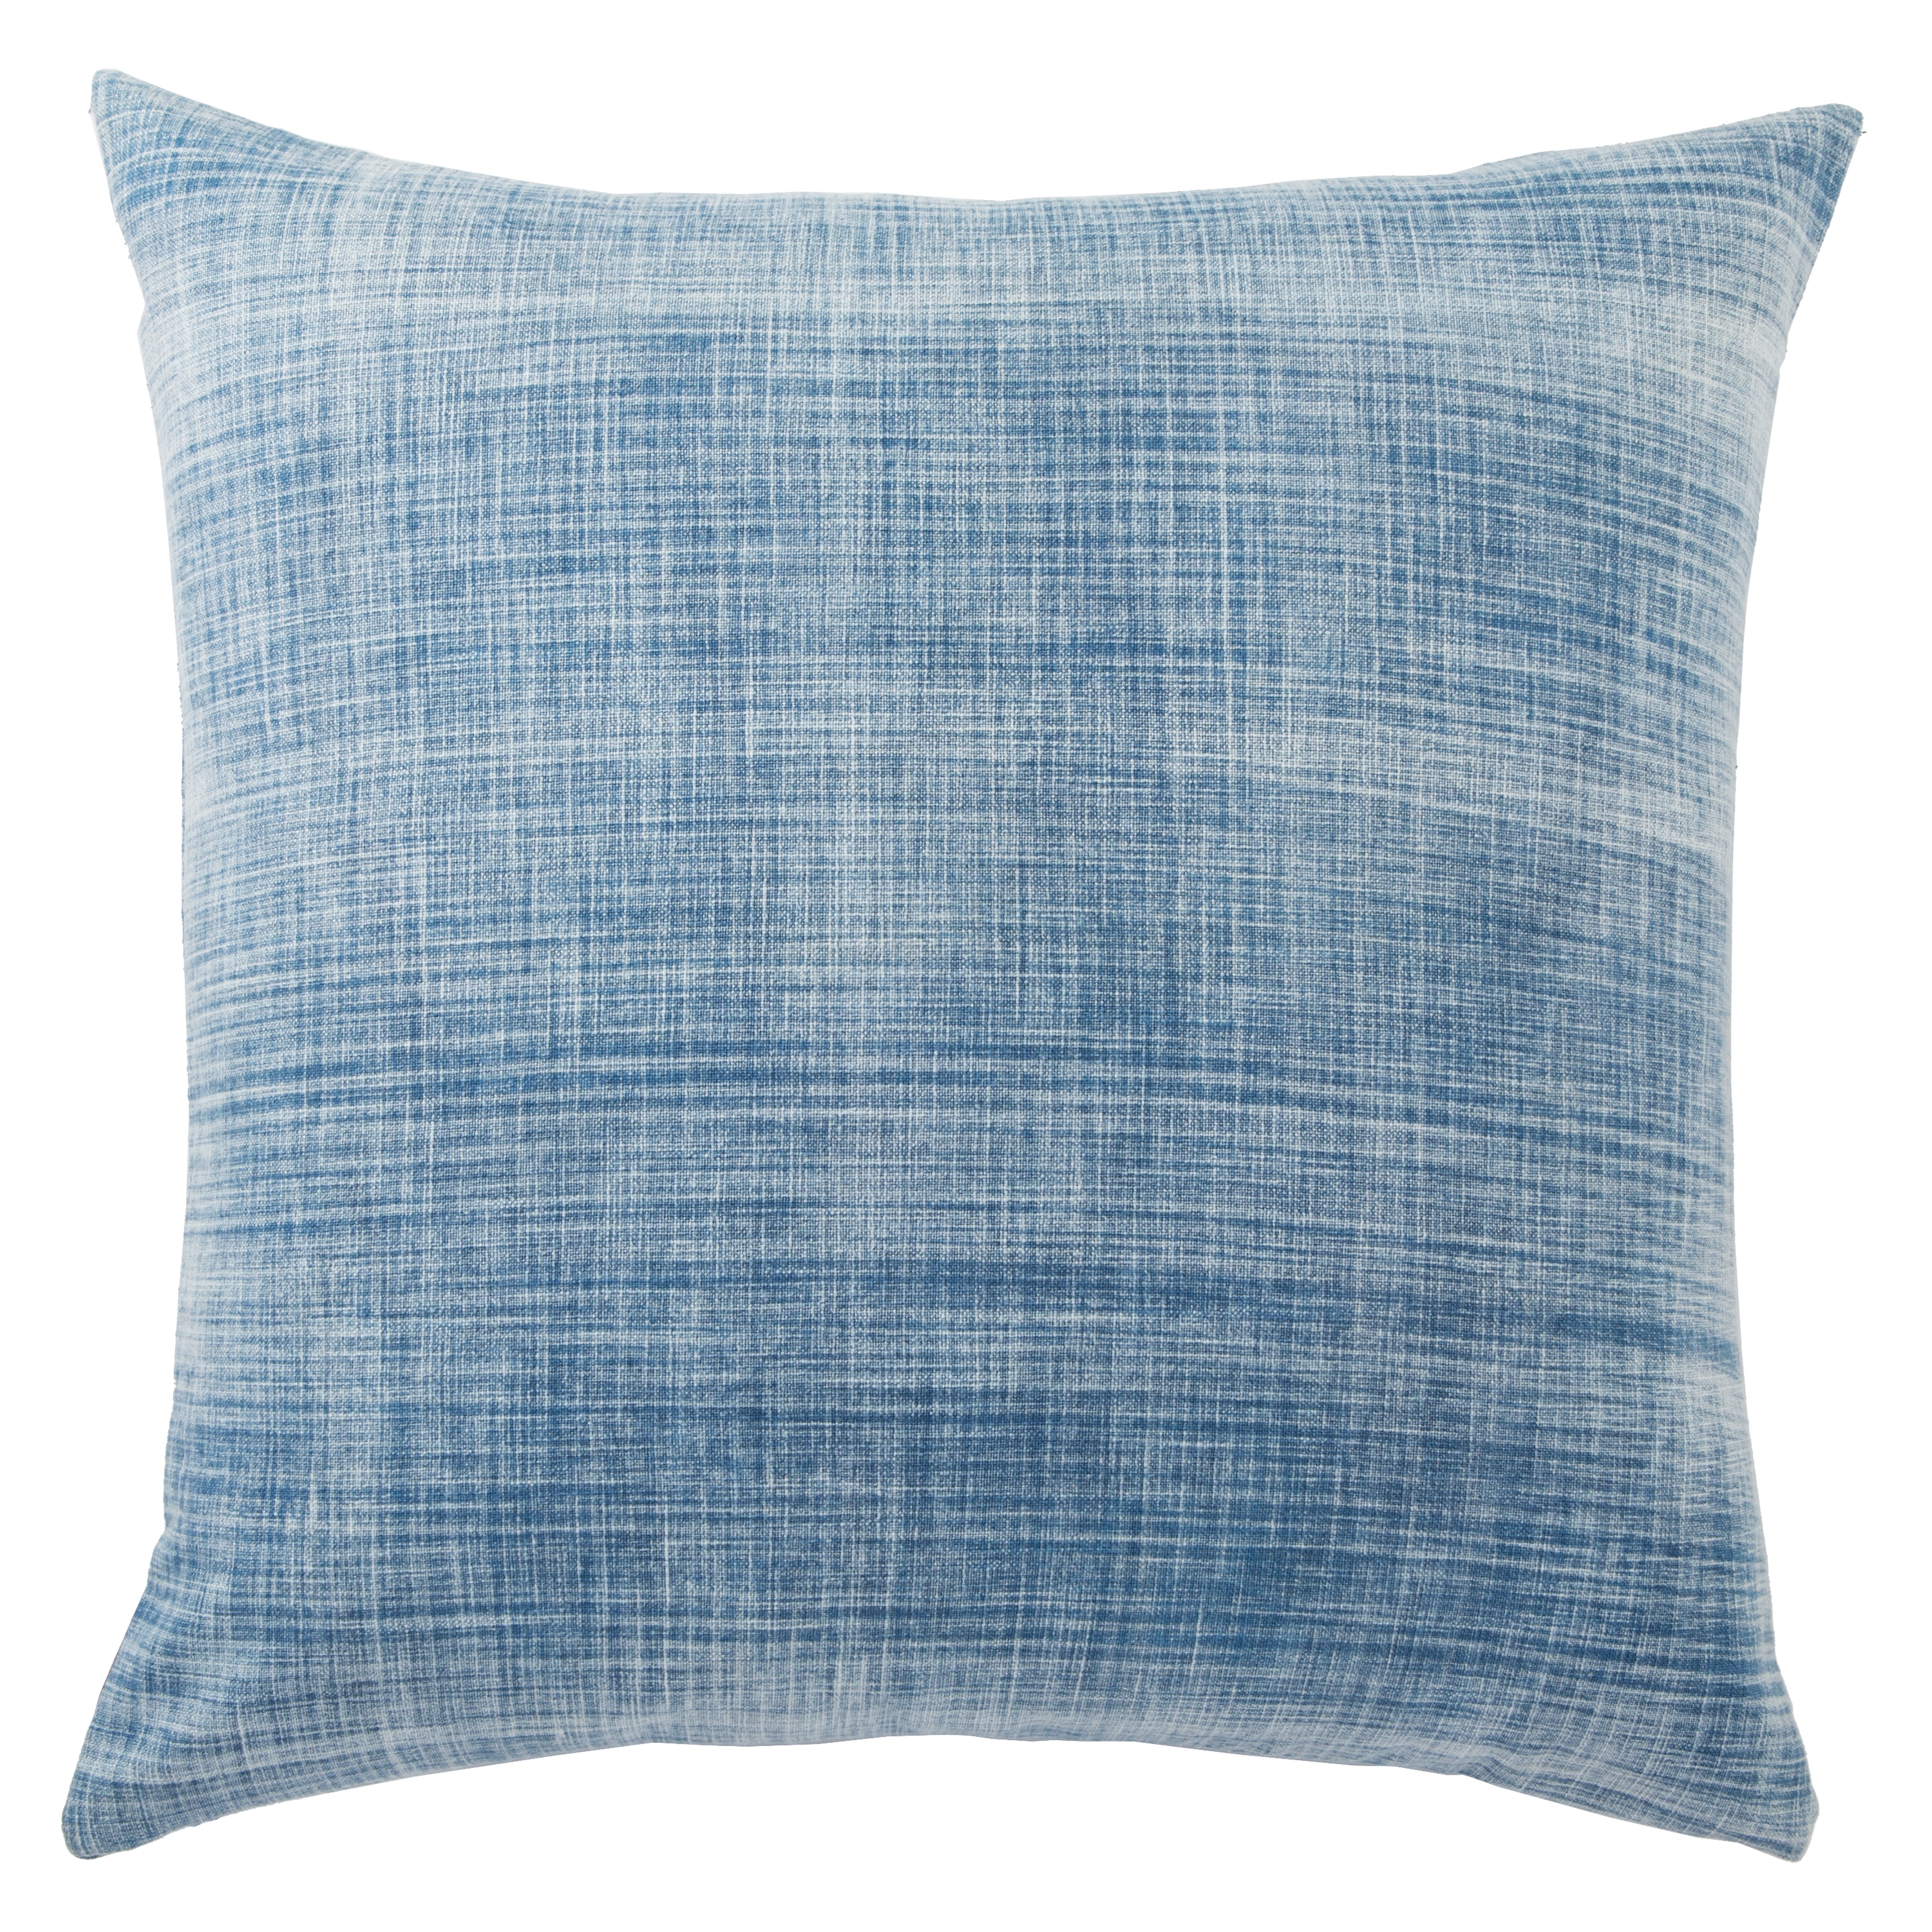 Revolve Pillow with Down Insert, Blue, 22" x 22" - Image 1